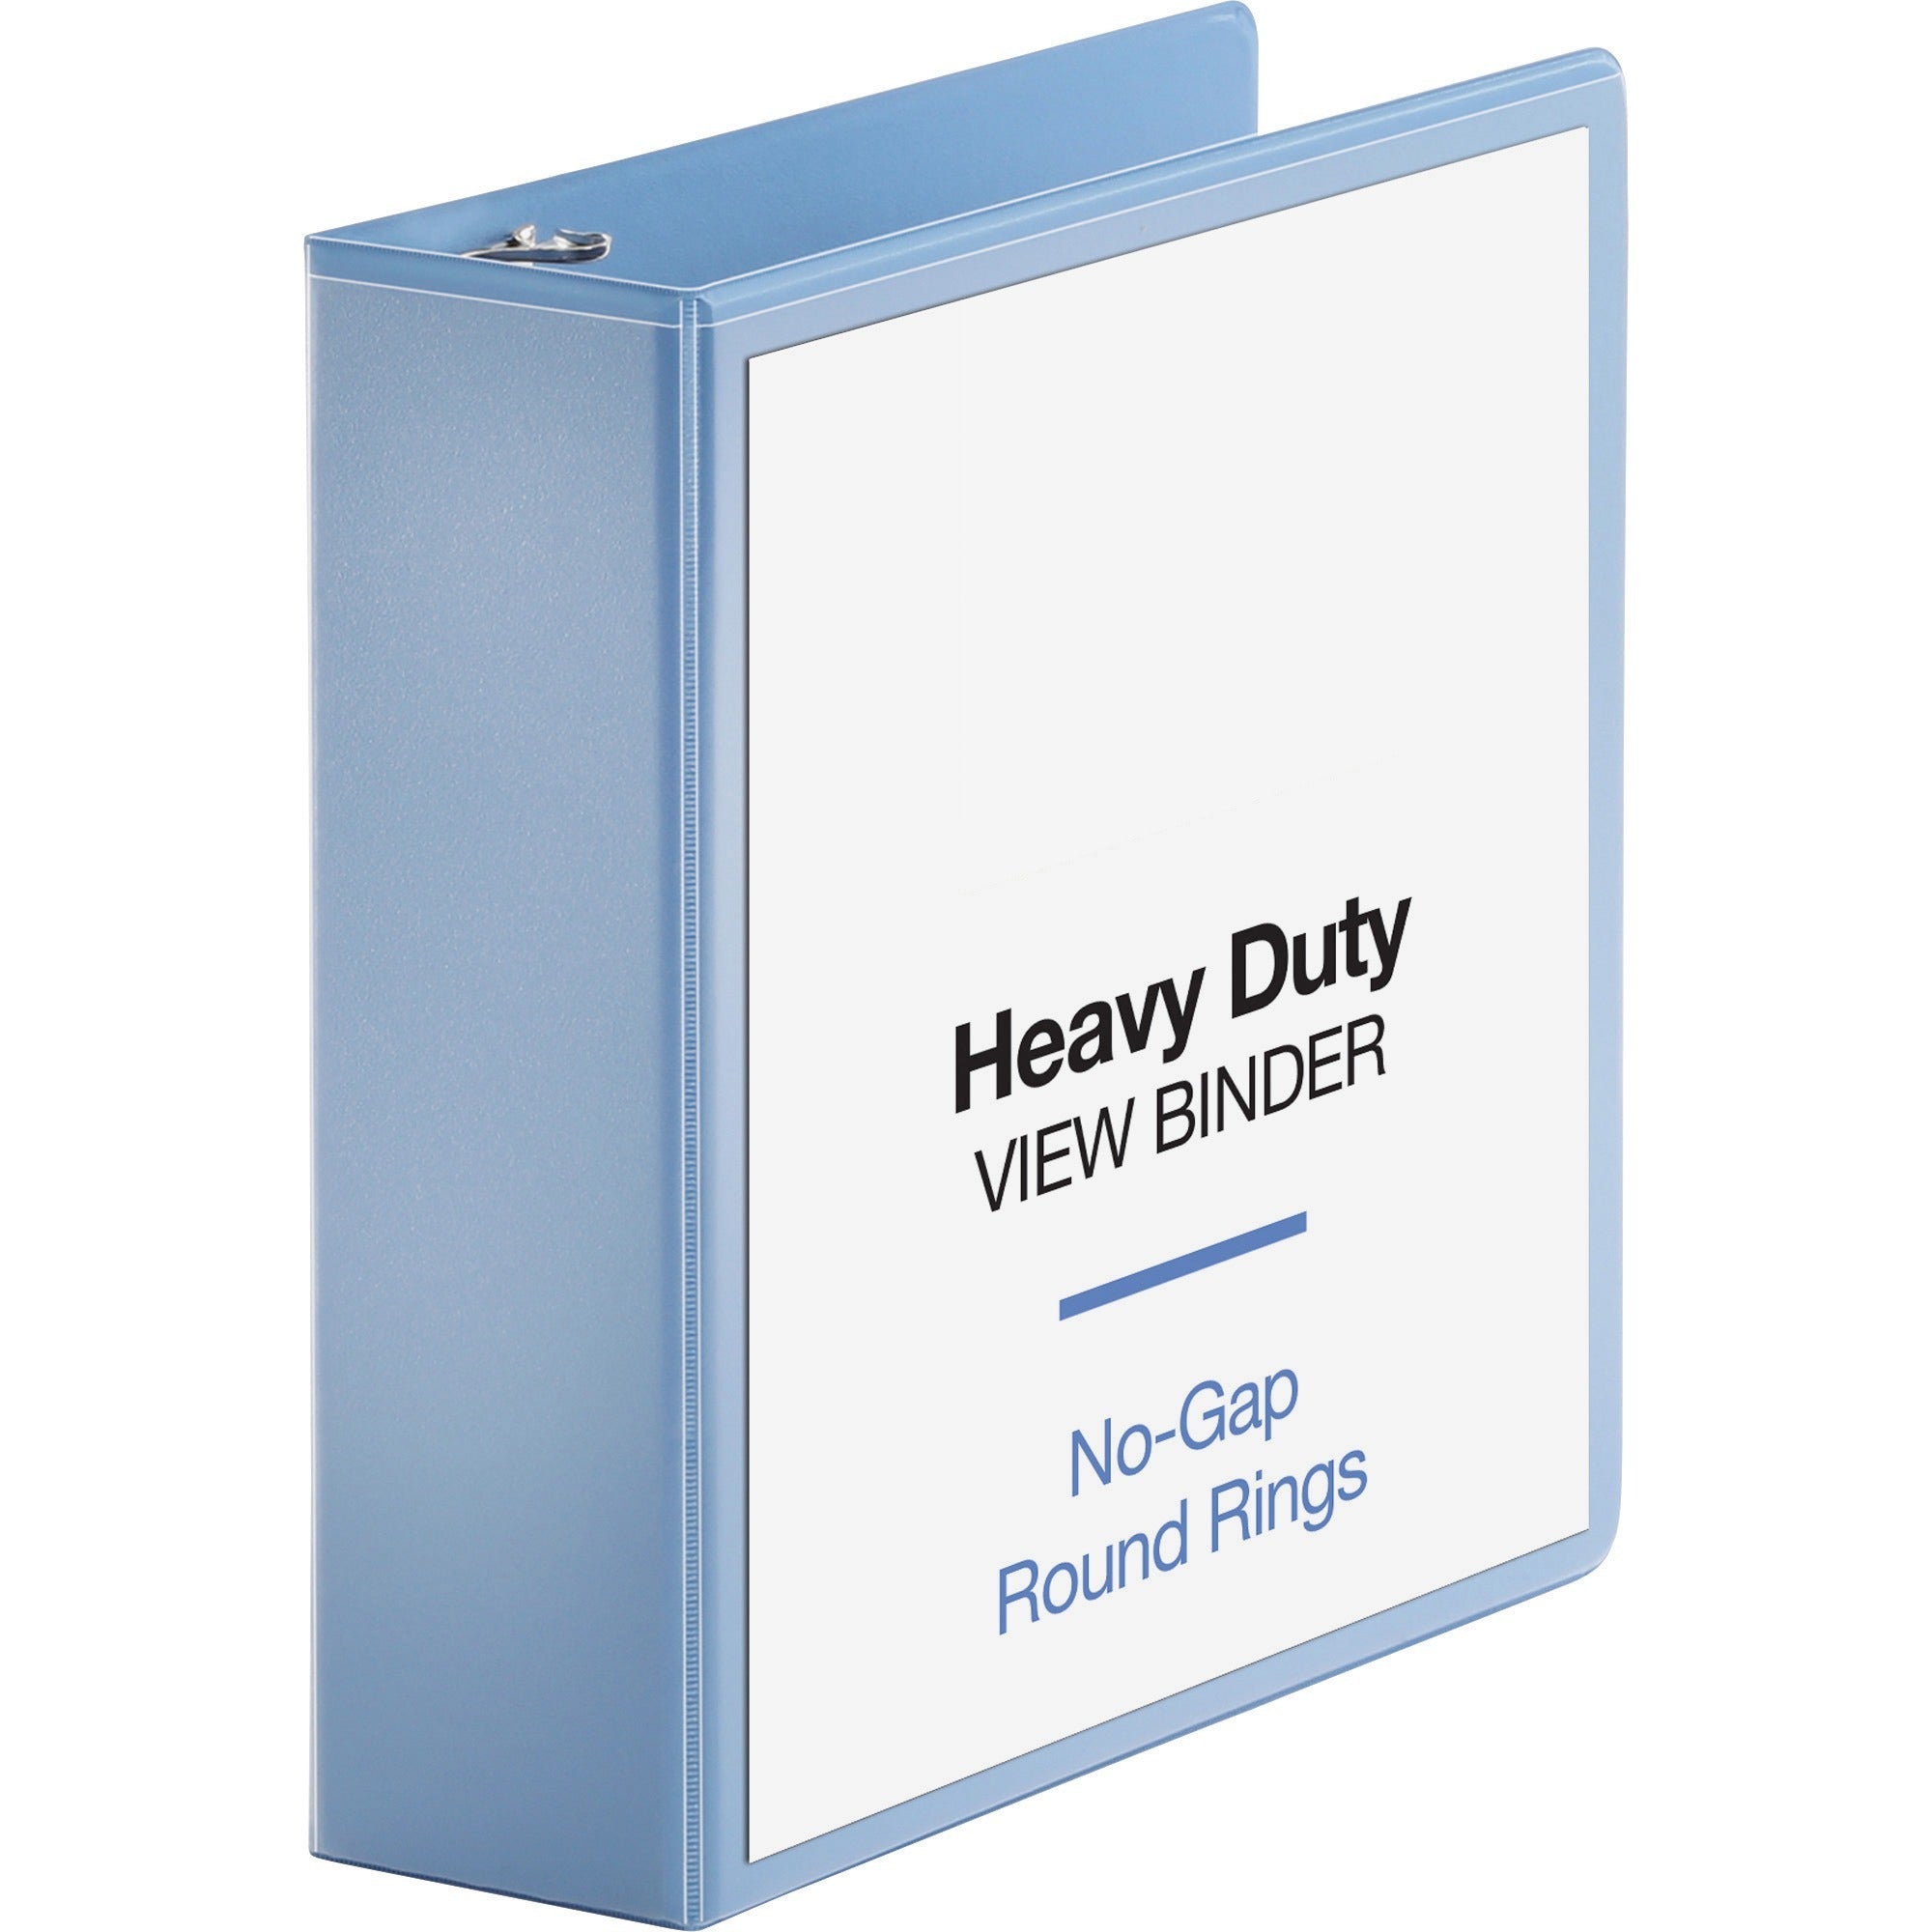 business-source-round-ring-view-binder-3-binder-capacity-letter-8-1-2-x-11-sheet-size-625-sheet-capacity-round-ring-fasteners-2-internal-pockets-polypropylene-chipboard-board-light-blue-wrinkle-free-non-glare-transfer-saf_bsn19752 - 1